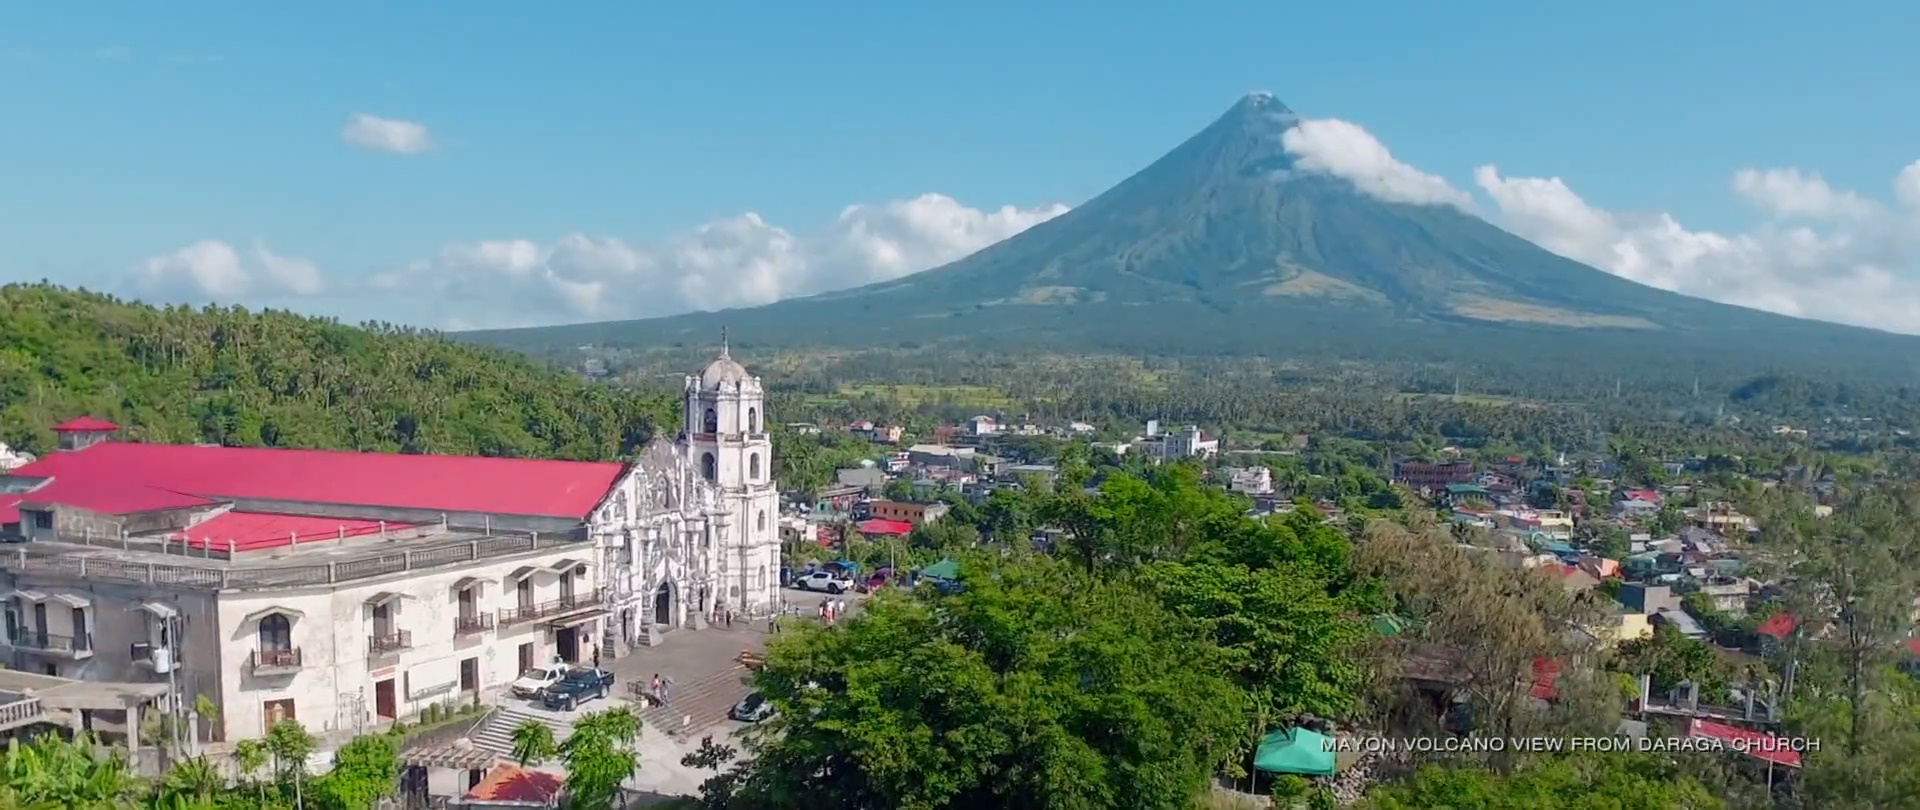 Albay Province: Discovering the Best of Bicol Region’s Natural Wonders